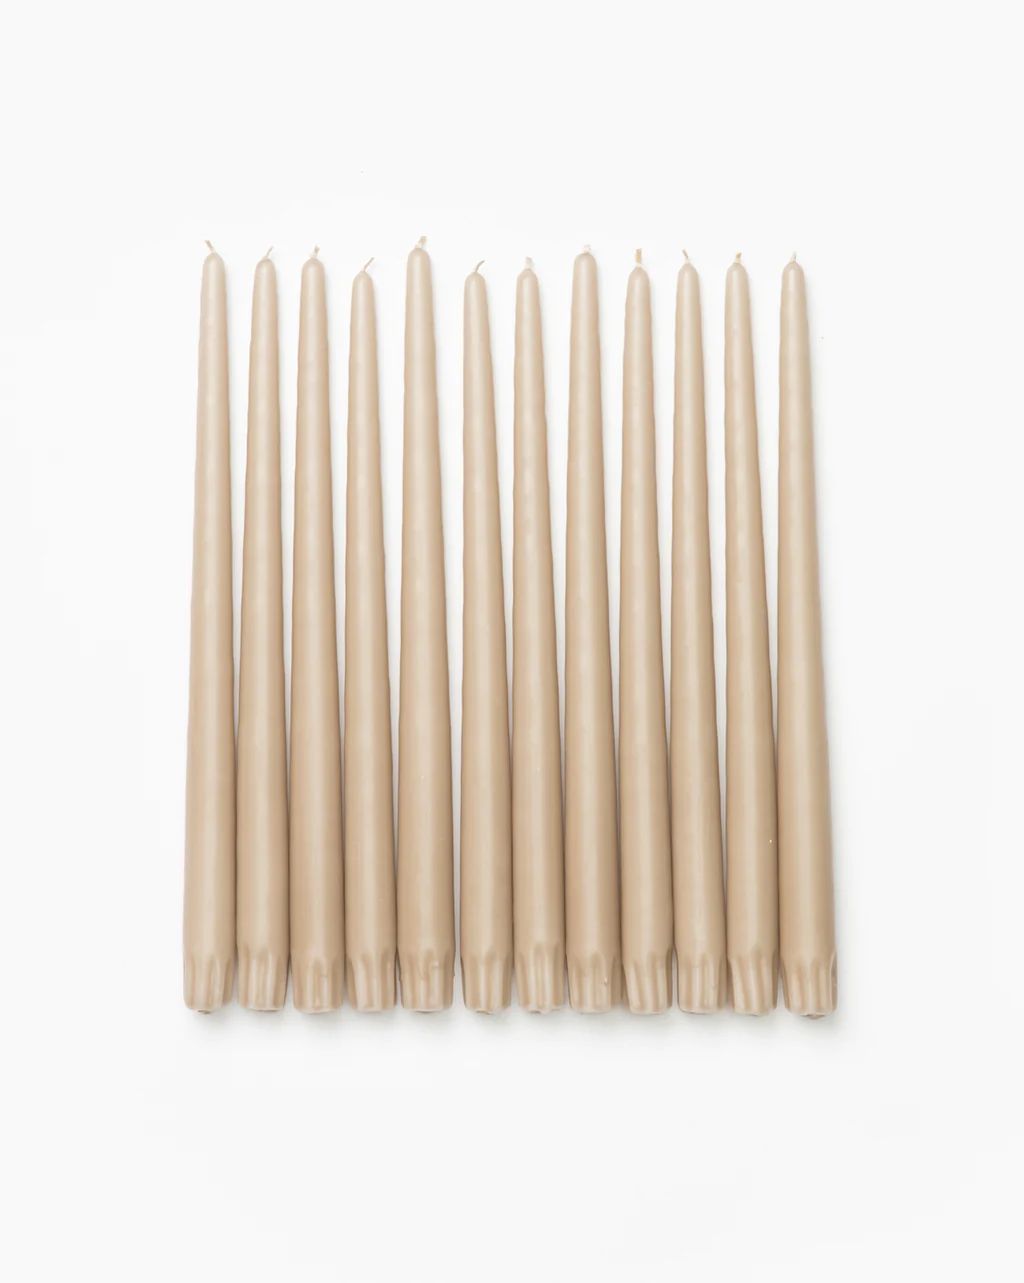 Sandstone Taper Candles (Set of 12) | McGee & Co.